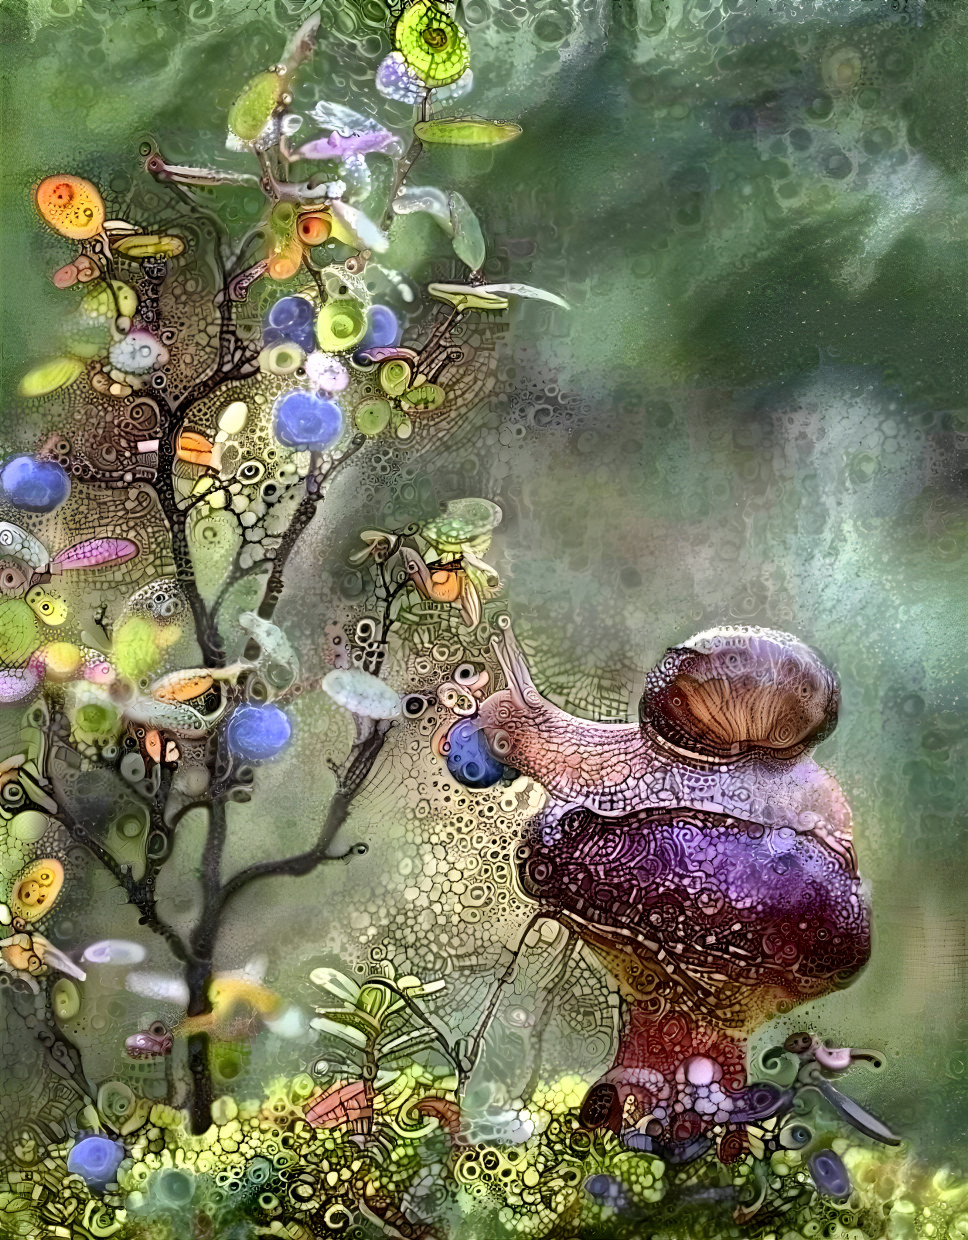 snail, blueberries and a mushroom